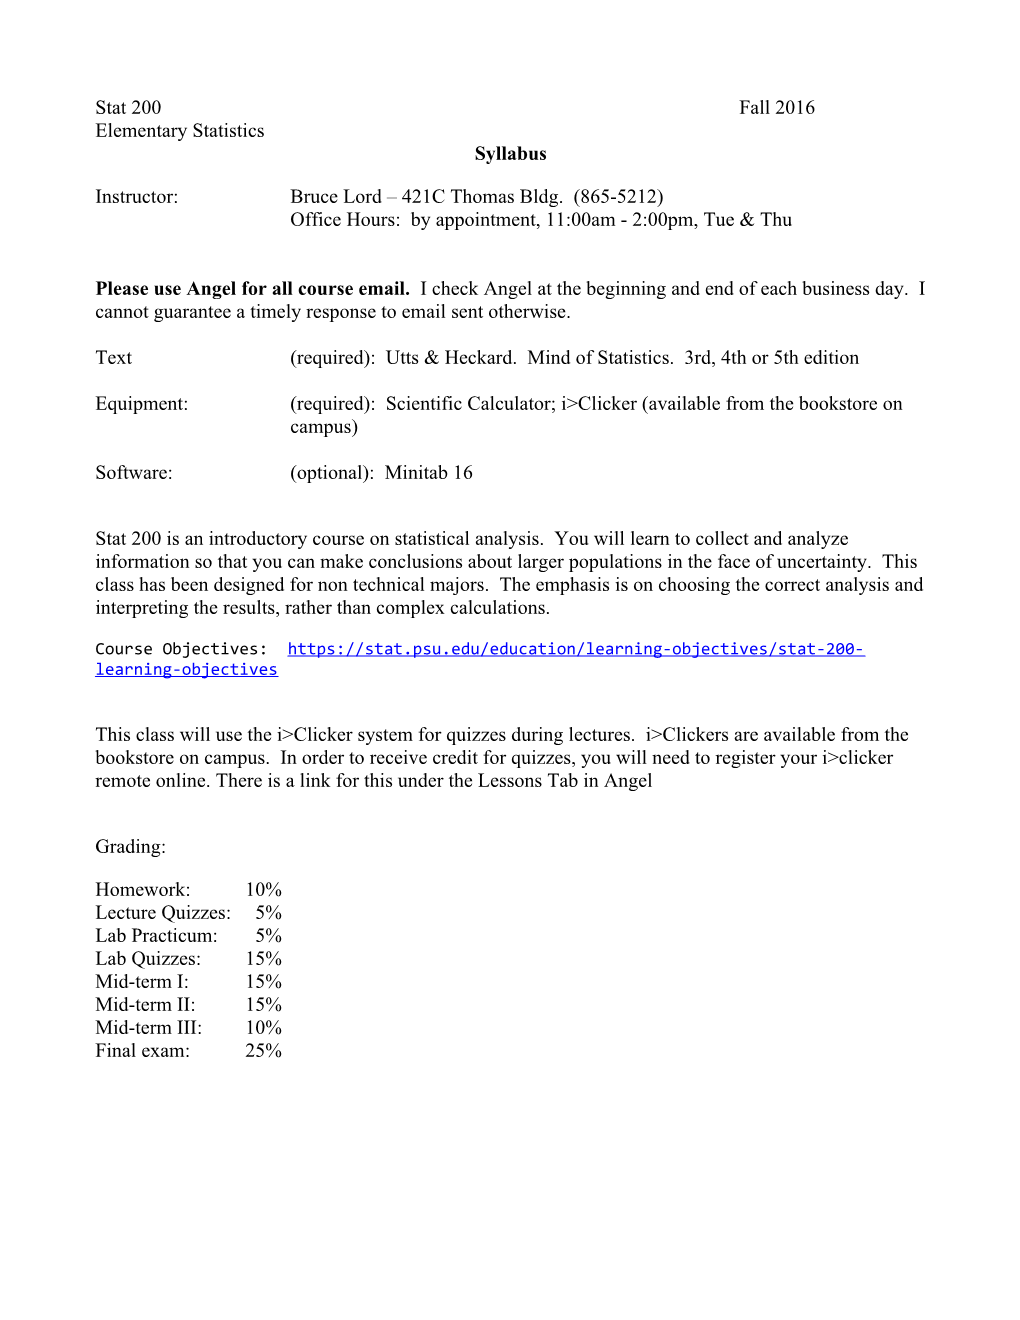 Syllabus: Forestry 366 - Forest Measurements, Spring 2002